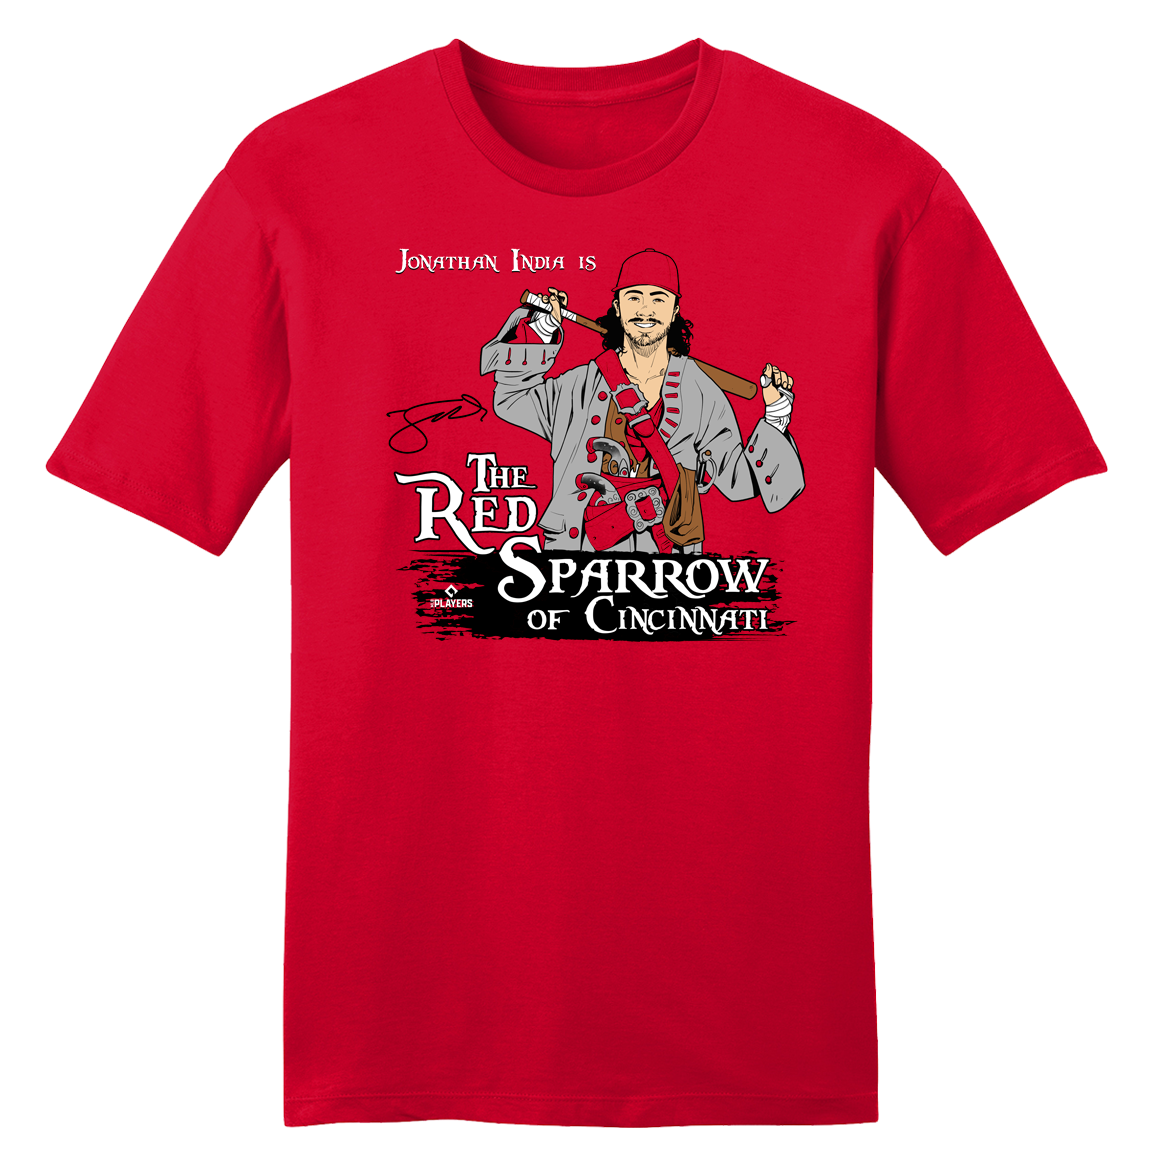 Jonathan India "The Red Sparrow"